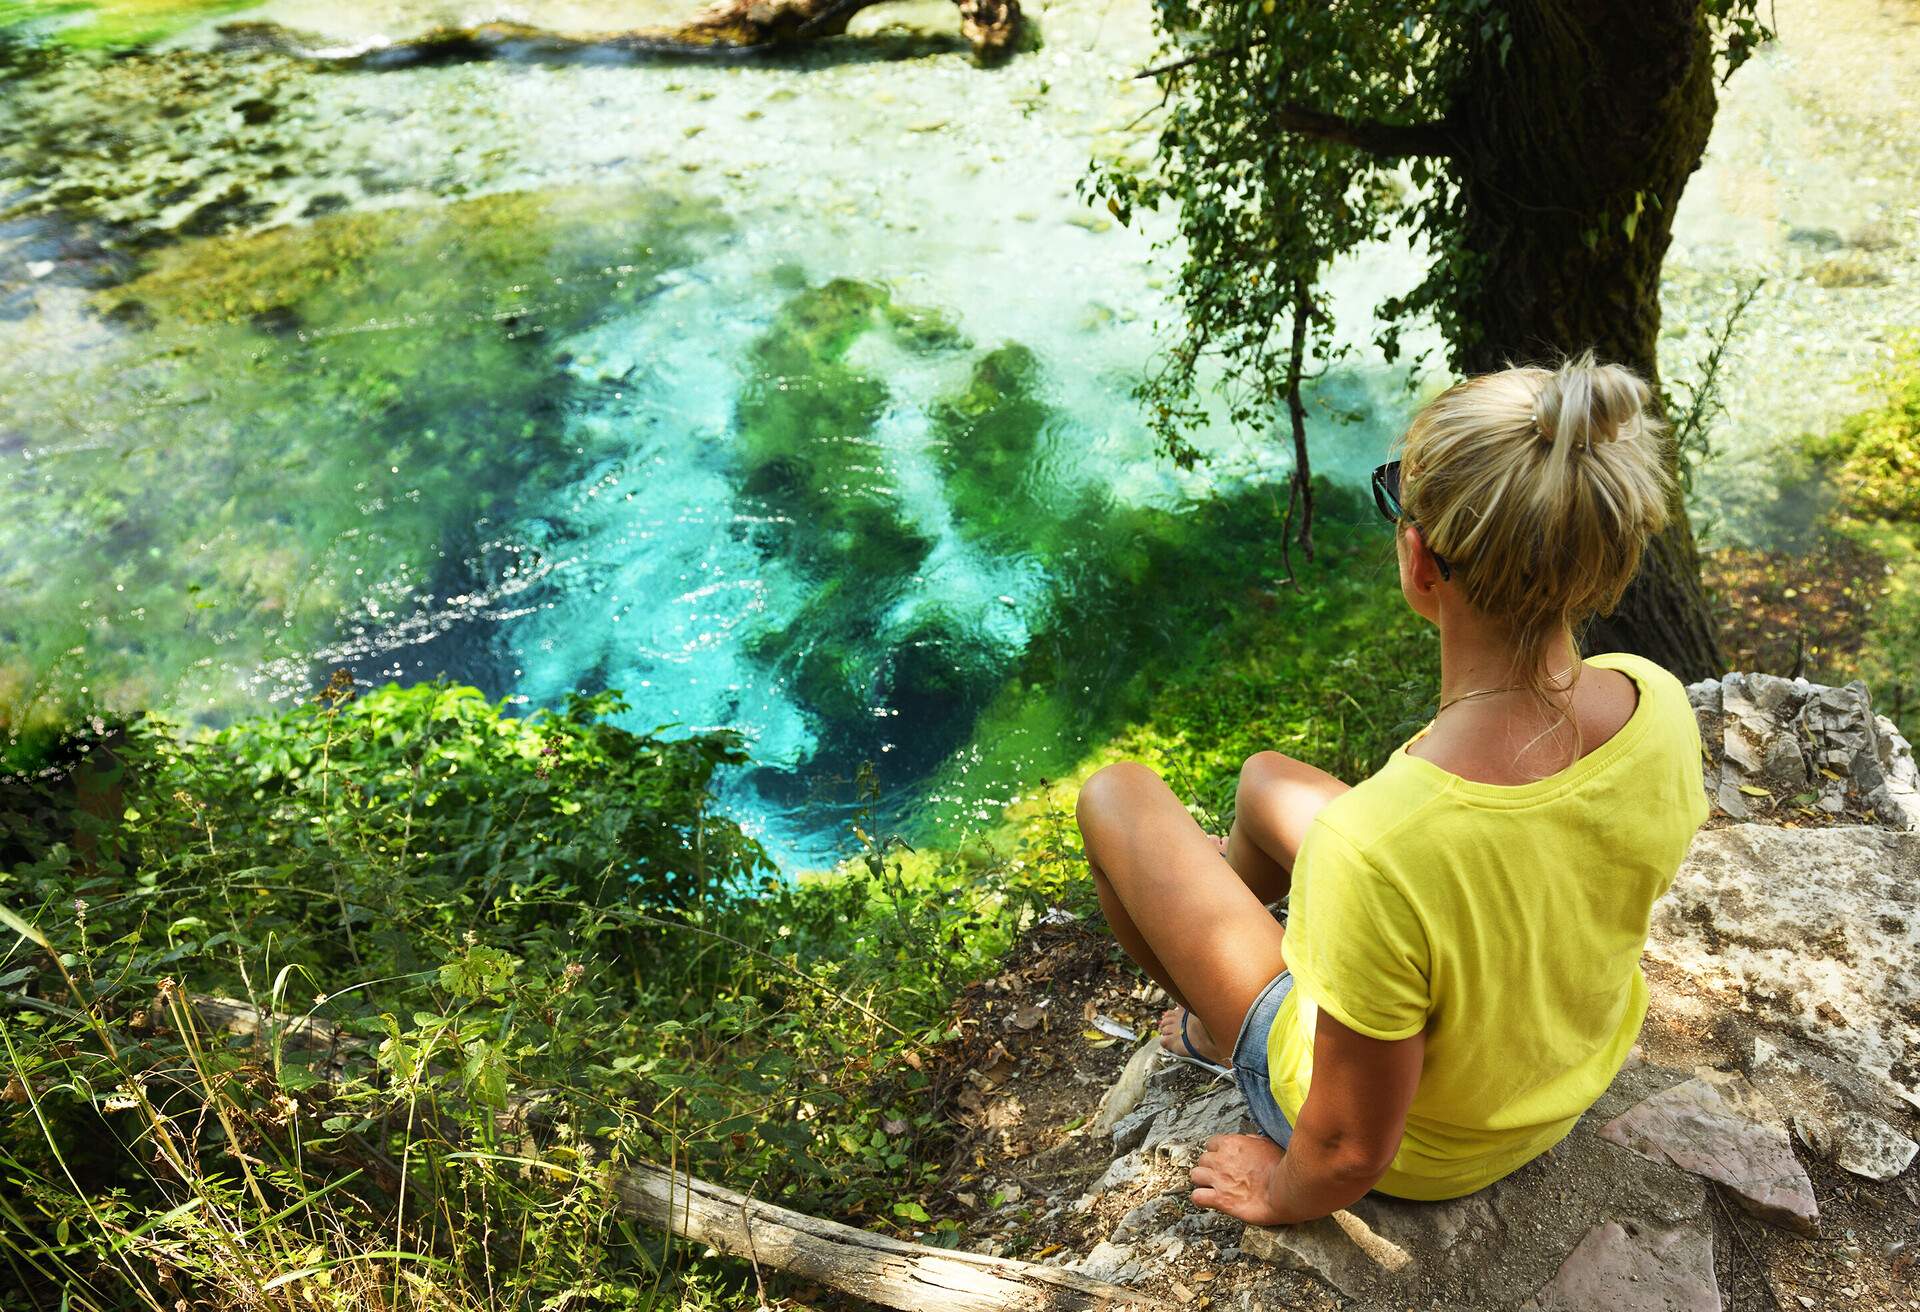 A woman in a yellow shirt sits on a cliff's edge overlooking a spring with turquoise waters.